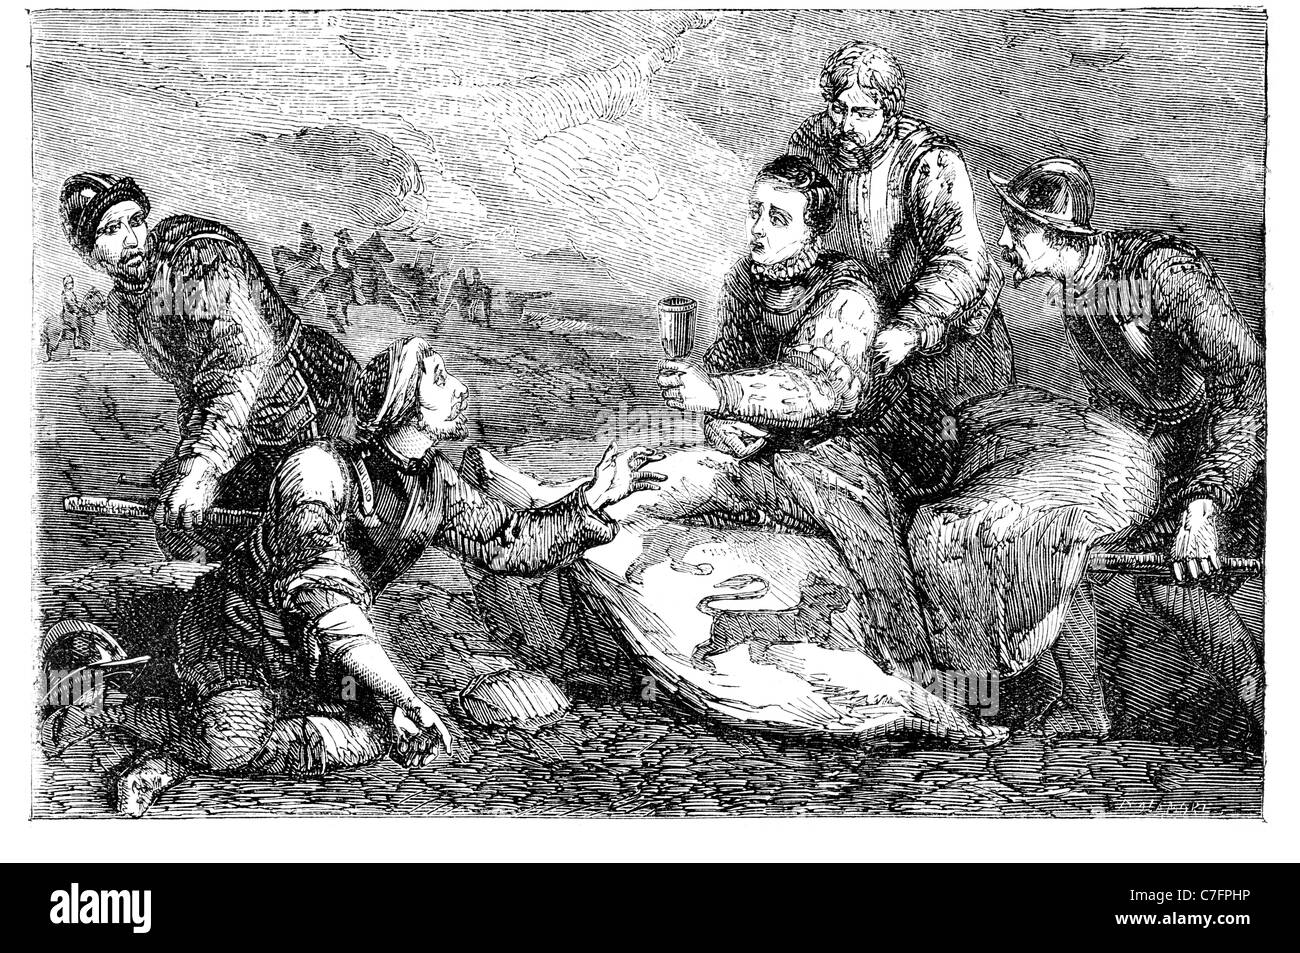 Sir Robert Philip Battle of Zutphen death English poet courtier soldier Elizabethan age  mortally wounded  died water bottle Stock Photo